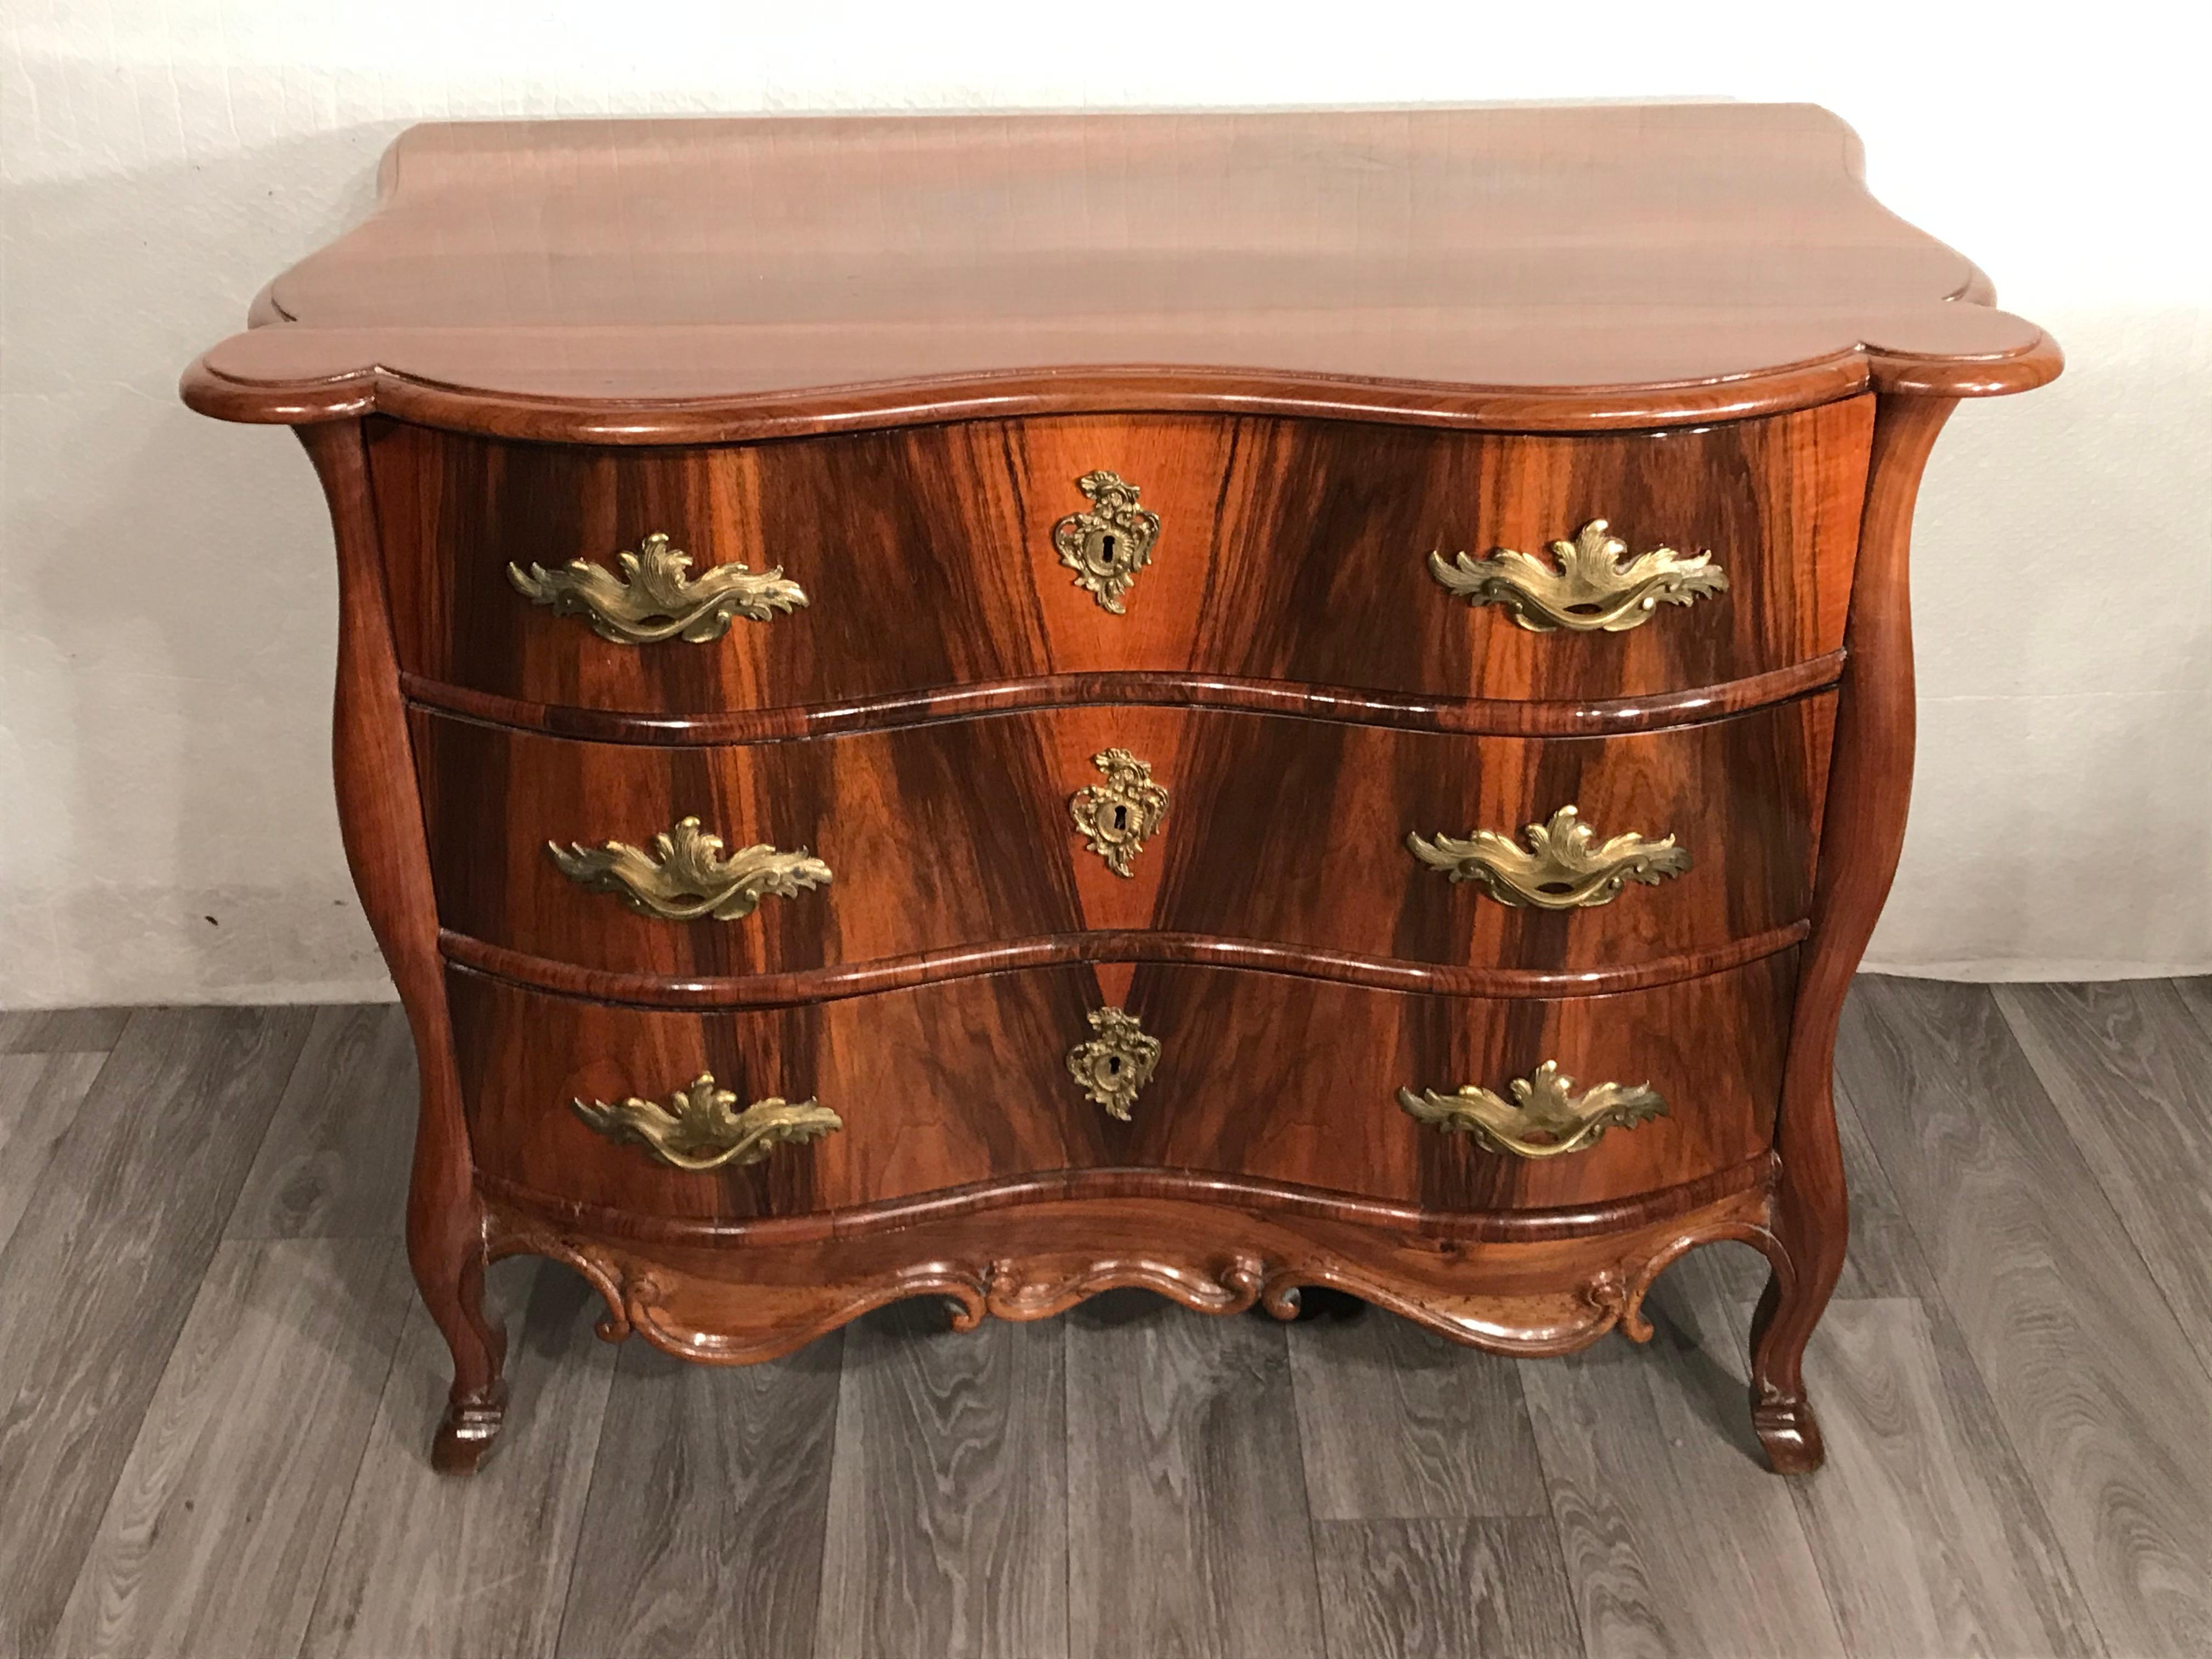 Baroque chest of drawers, Switzerland, 1750.
The 18th century three drawer commode has walnut veneered curved drawers, sides and top. The curved legs and the curved edging next to and below the drawers are made of carved walnut. The bronze fittings